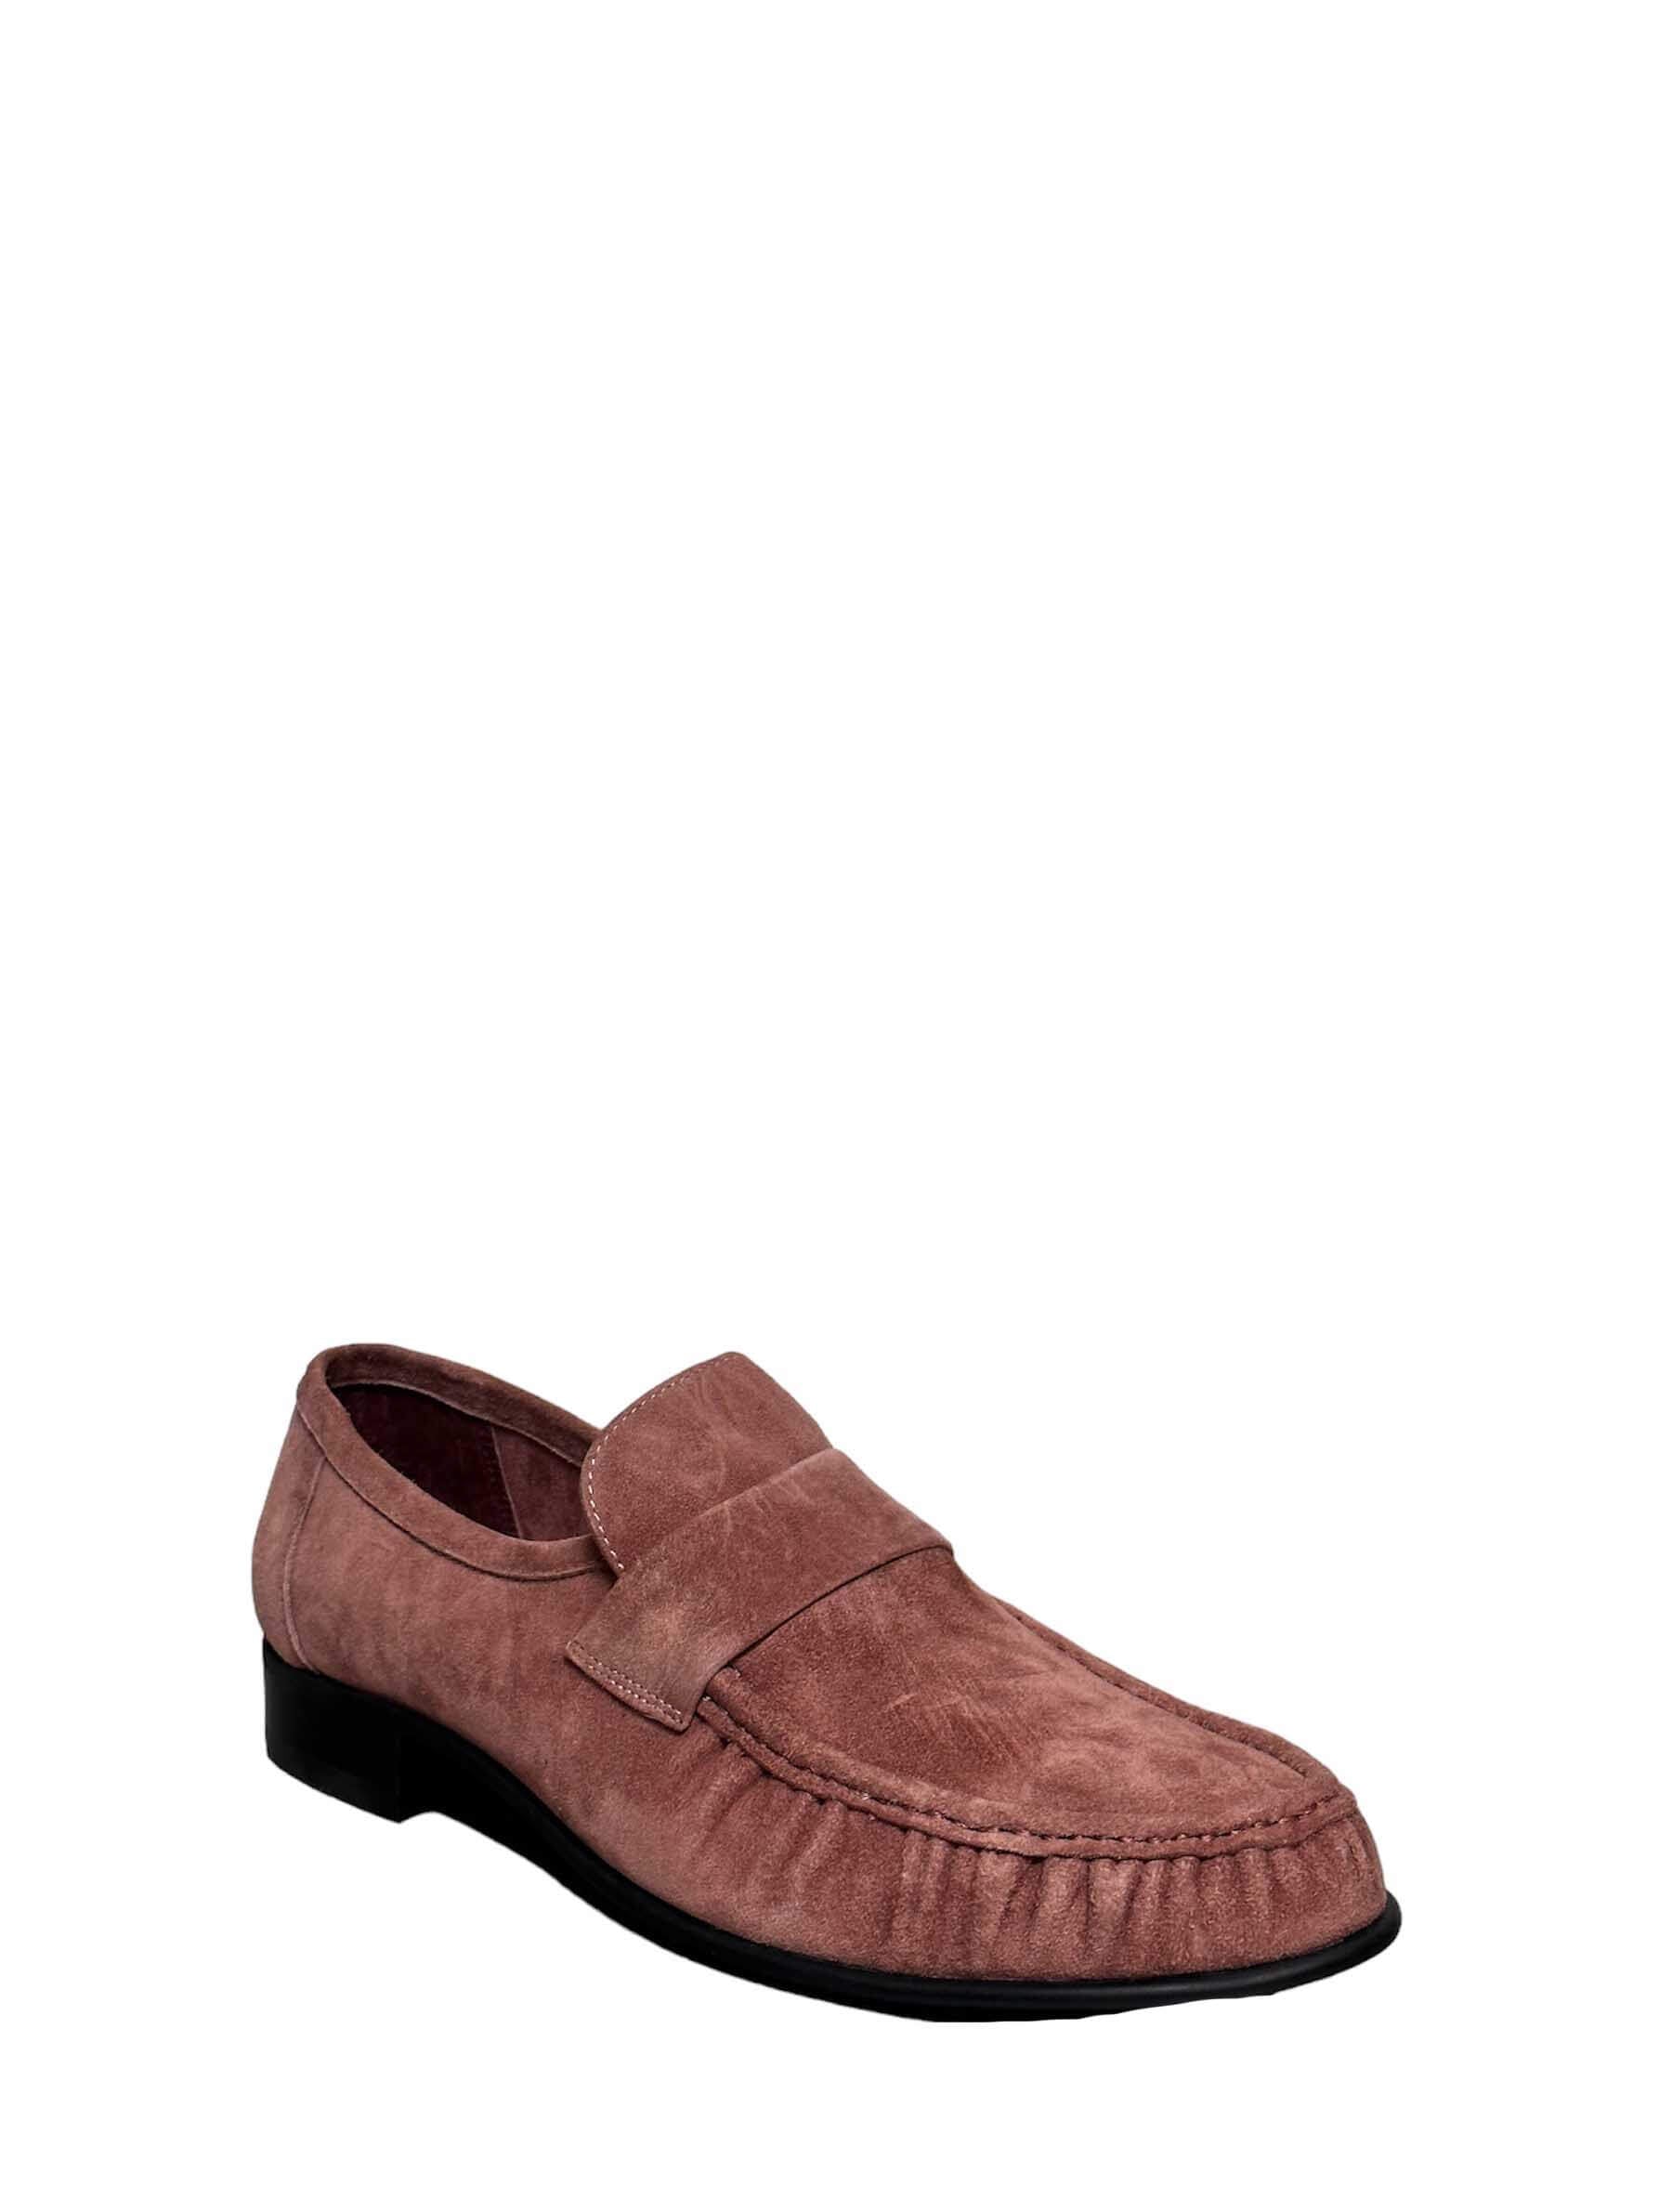 Jeffrey Campbell Societies Loafer in Blush Suede